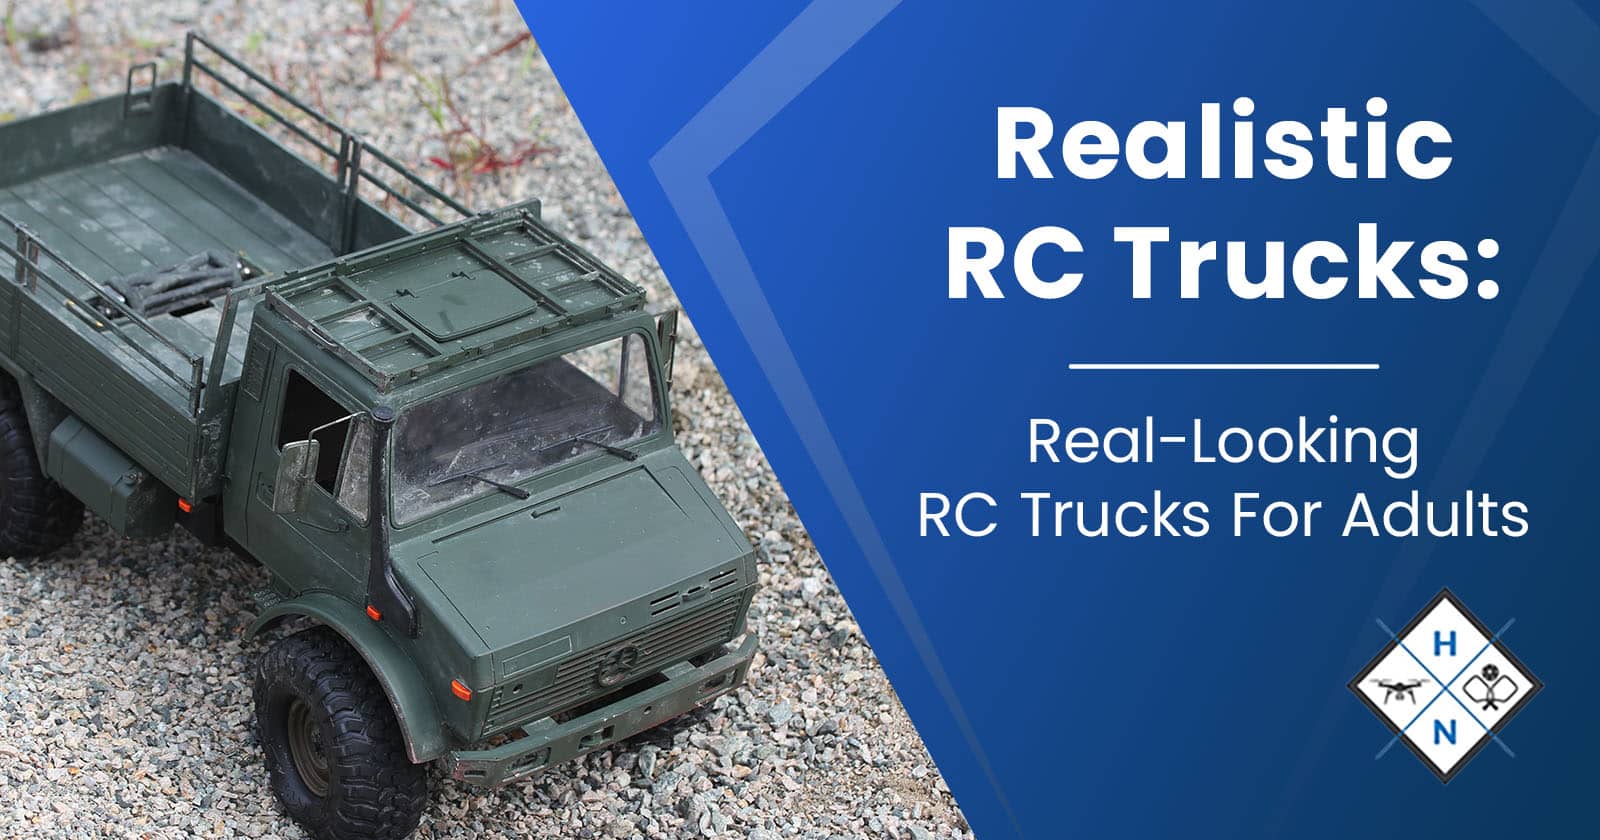 Realistic RC Trucks: Real-Looking RC Trucks For Adults